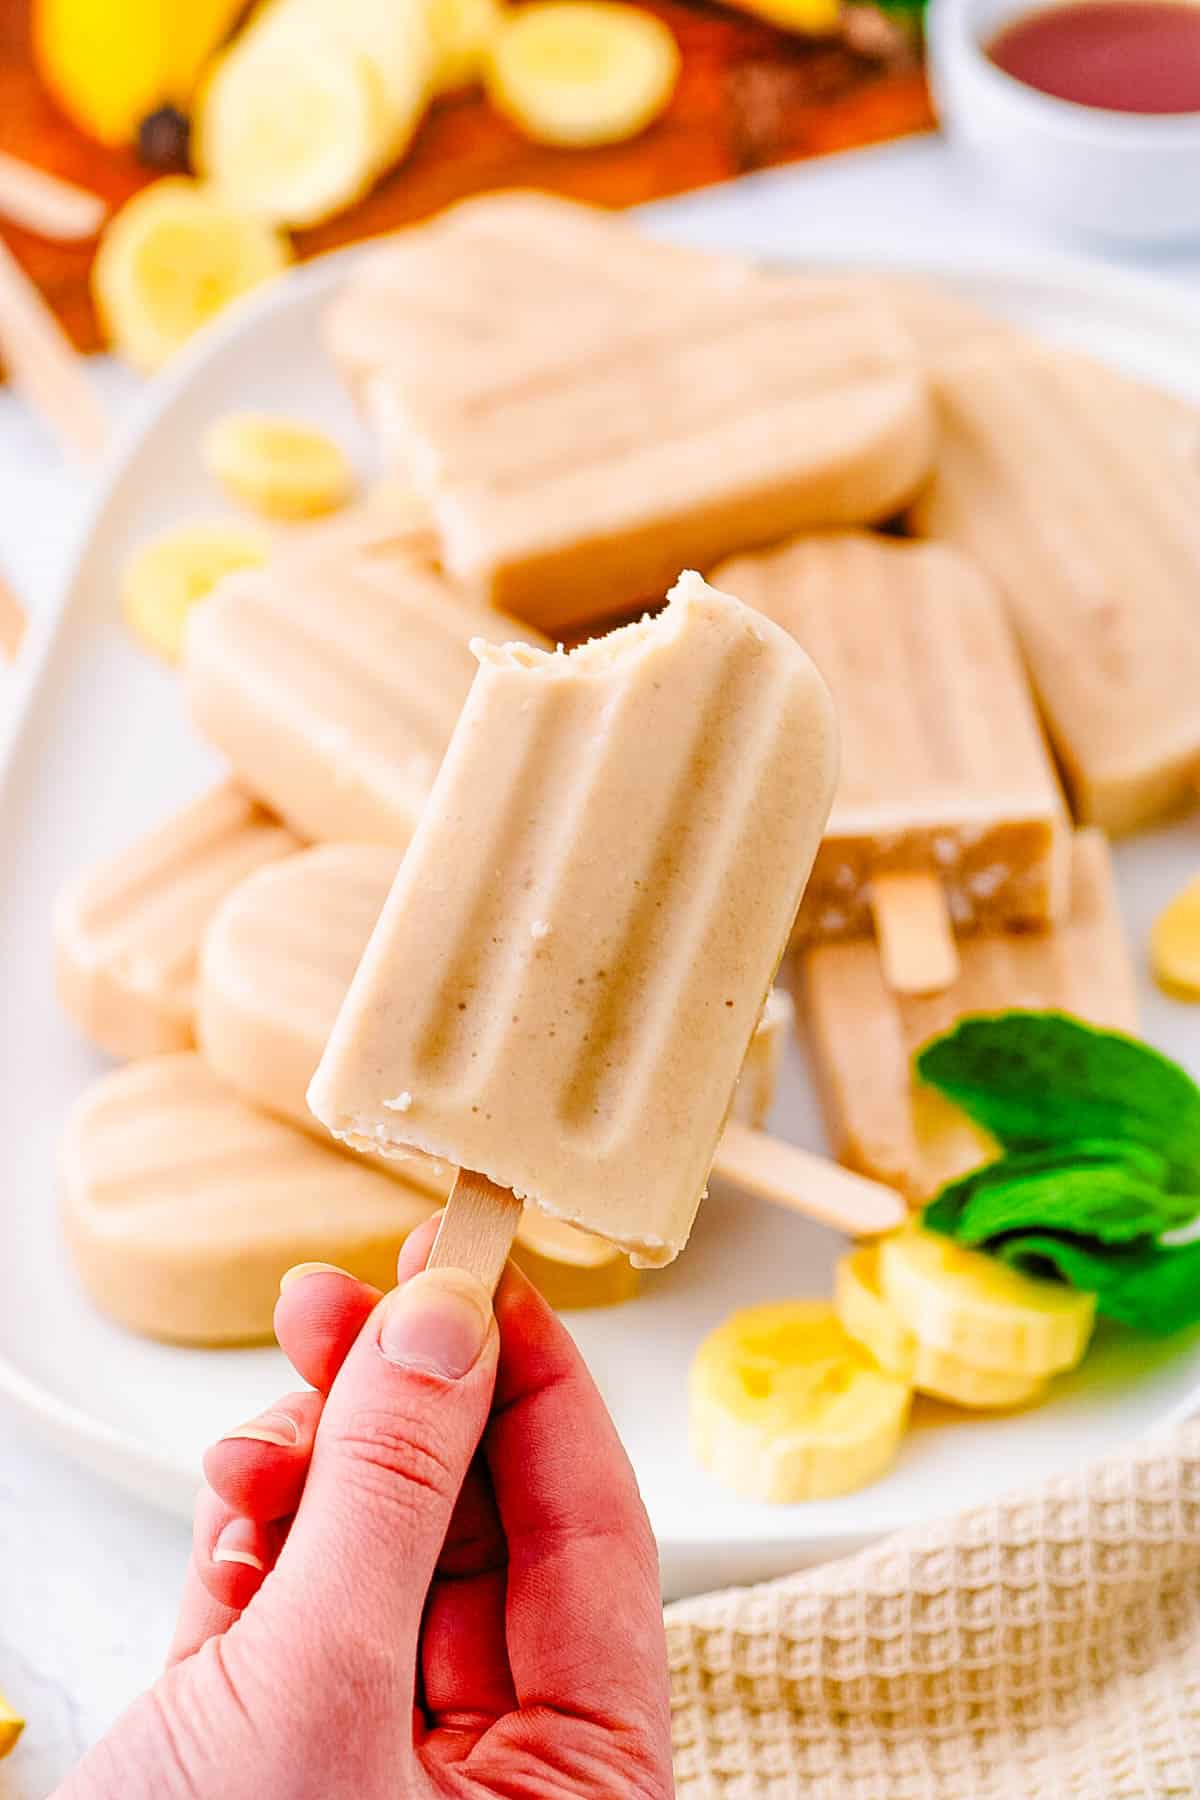 Banana popsicles served on a white tray with a hand holding up one popsicle.